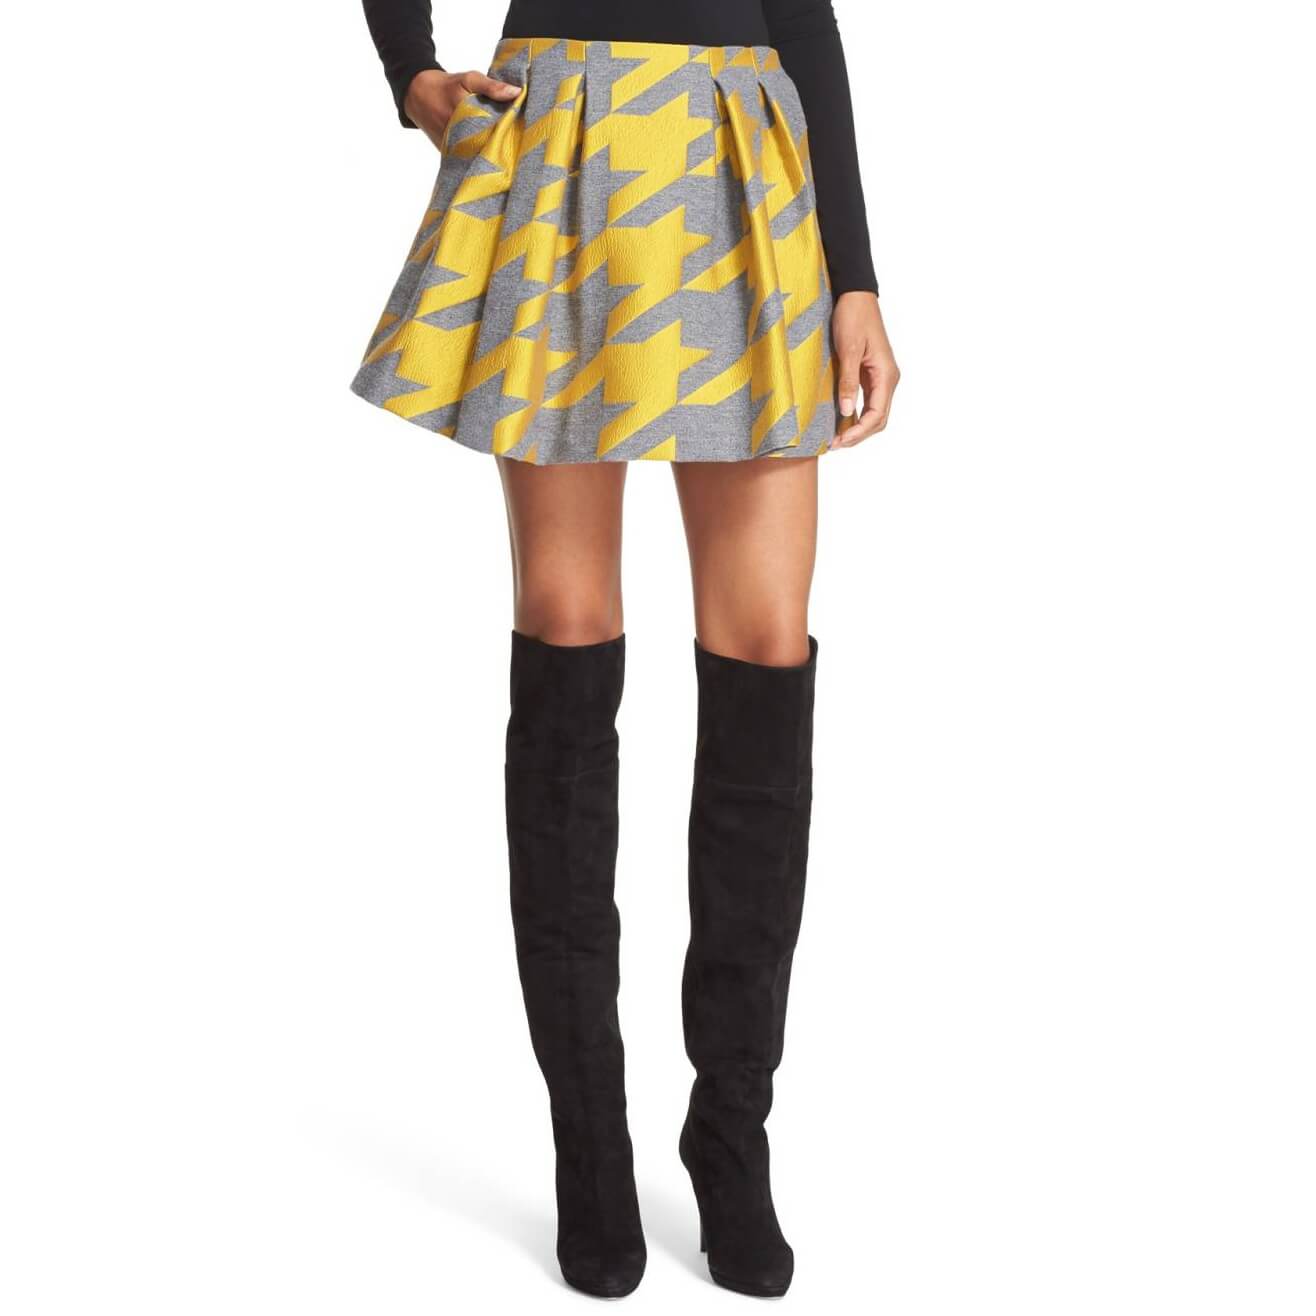 Alice + Olivia Connor Oversize Houndstooth Lampshade Skirt